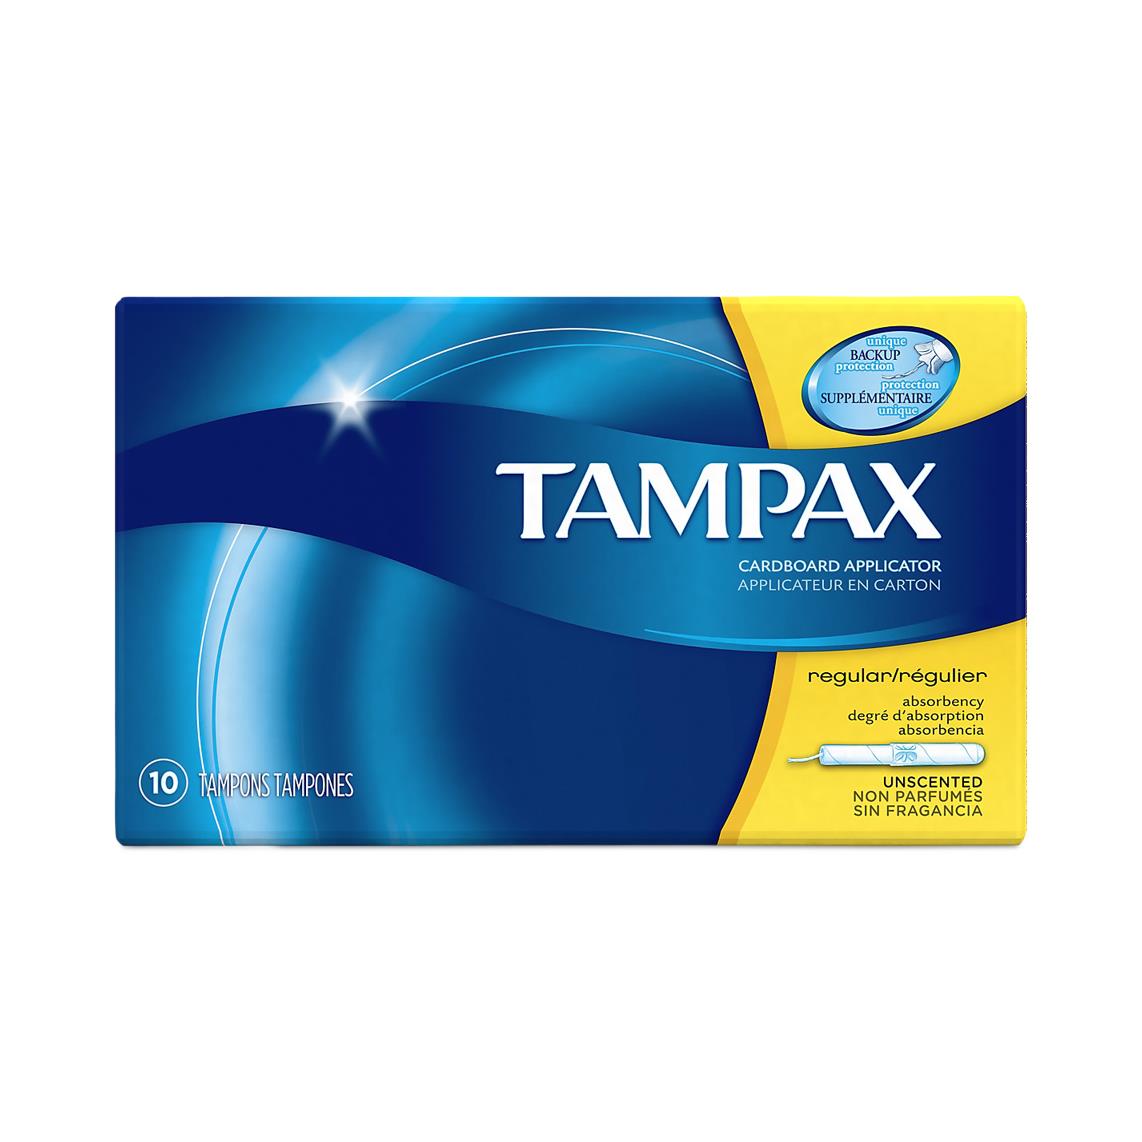  Tampax Regular Absorbency Tampons with Flushable